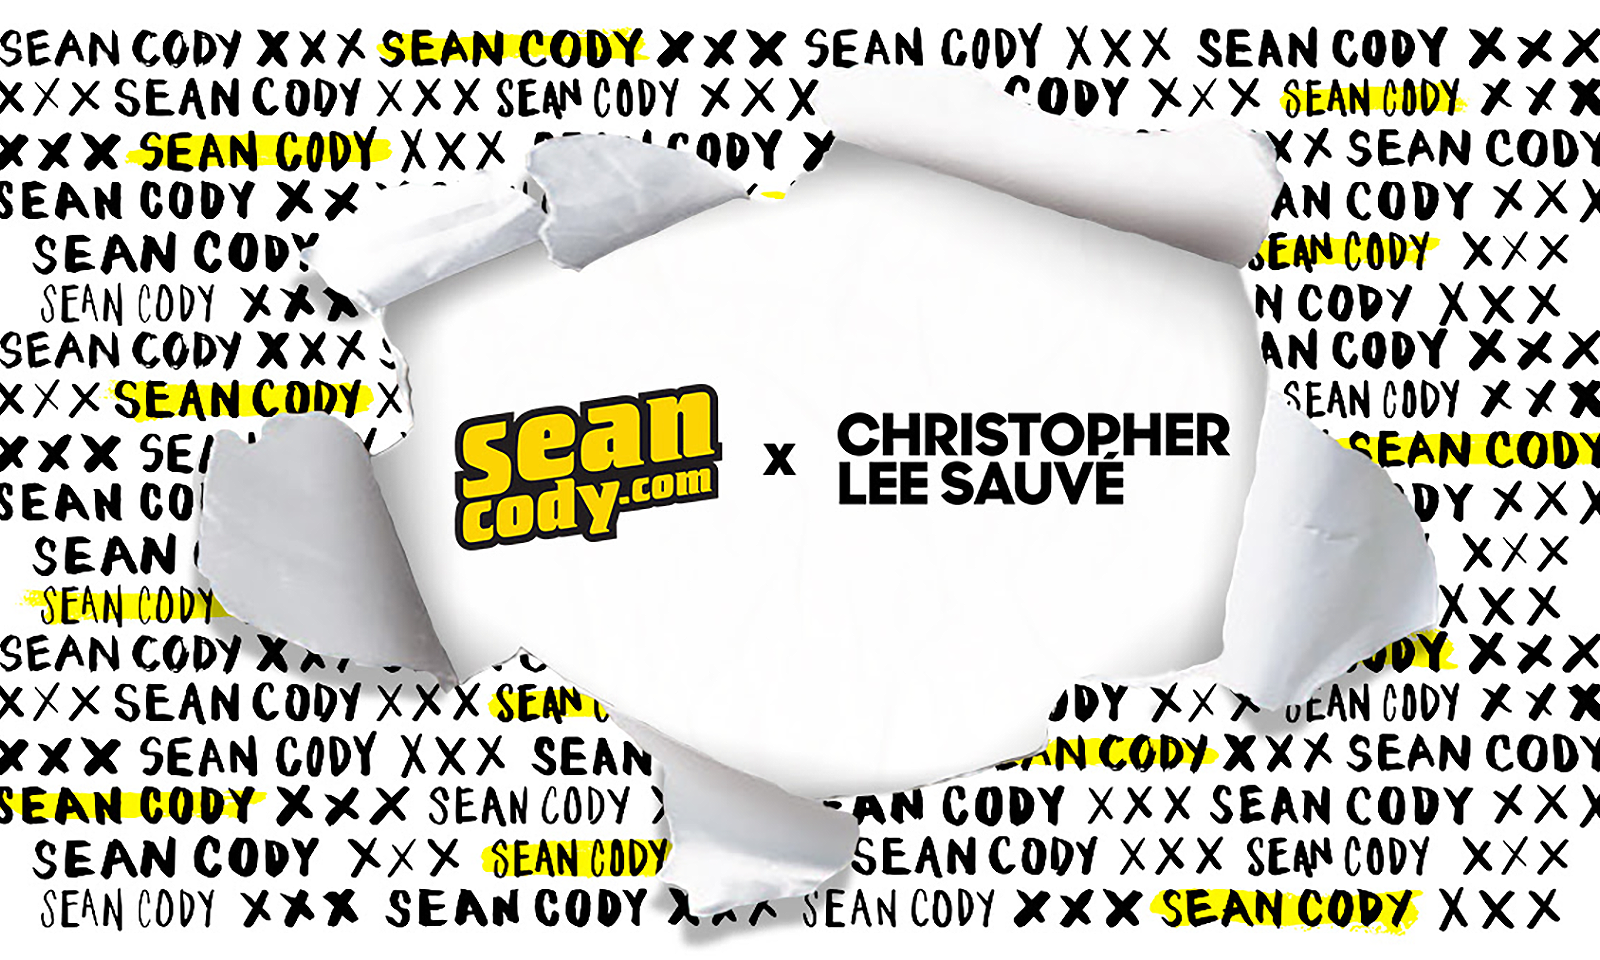 SeanCody Launches Christopher Lee Sauvé-Design Capsule Collection